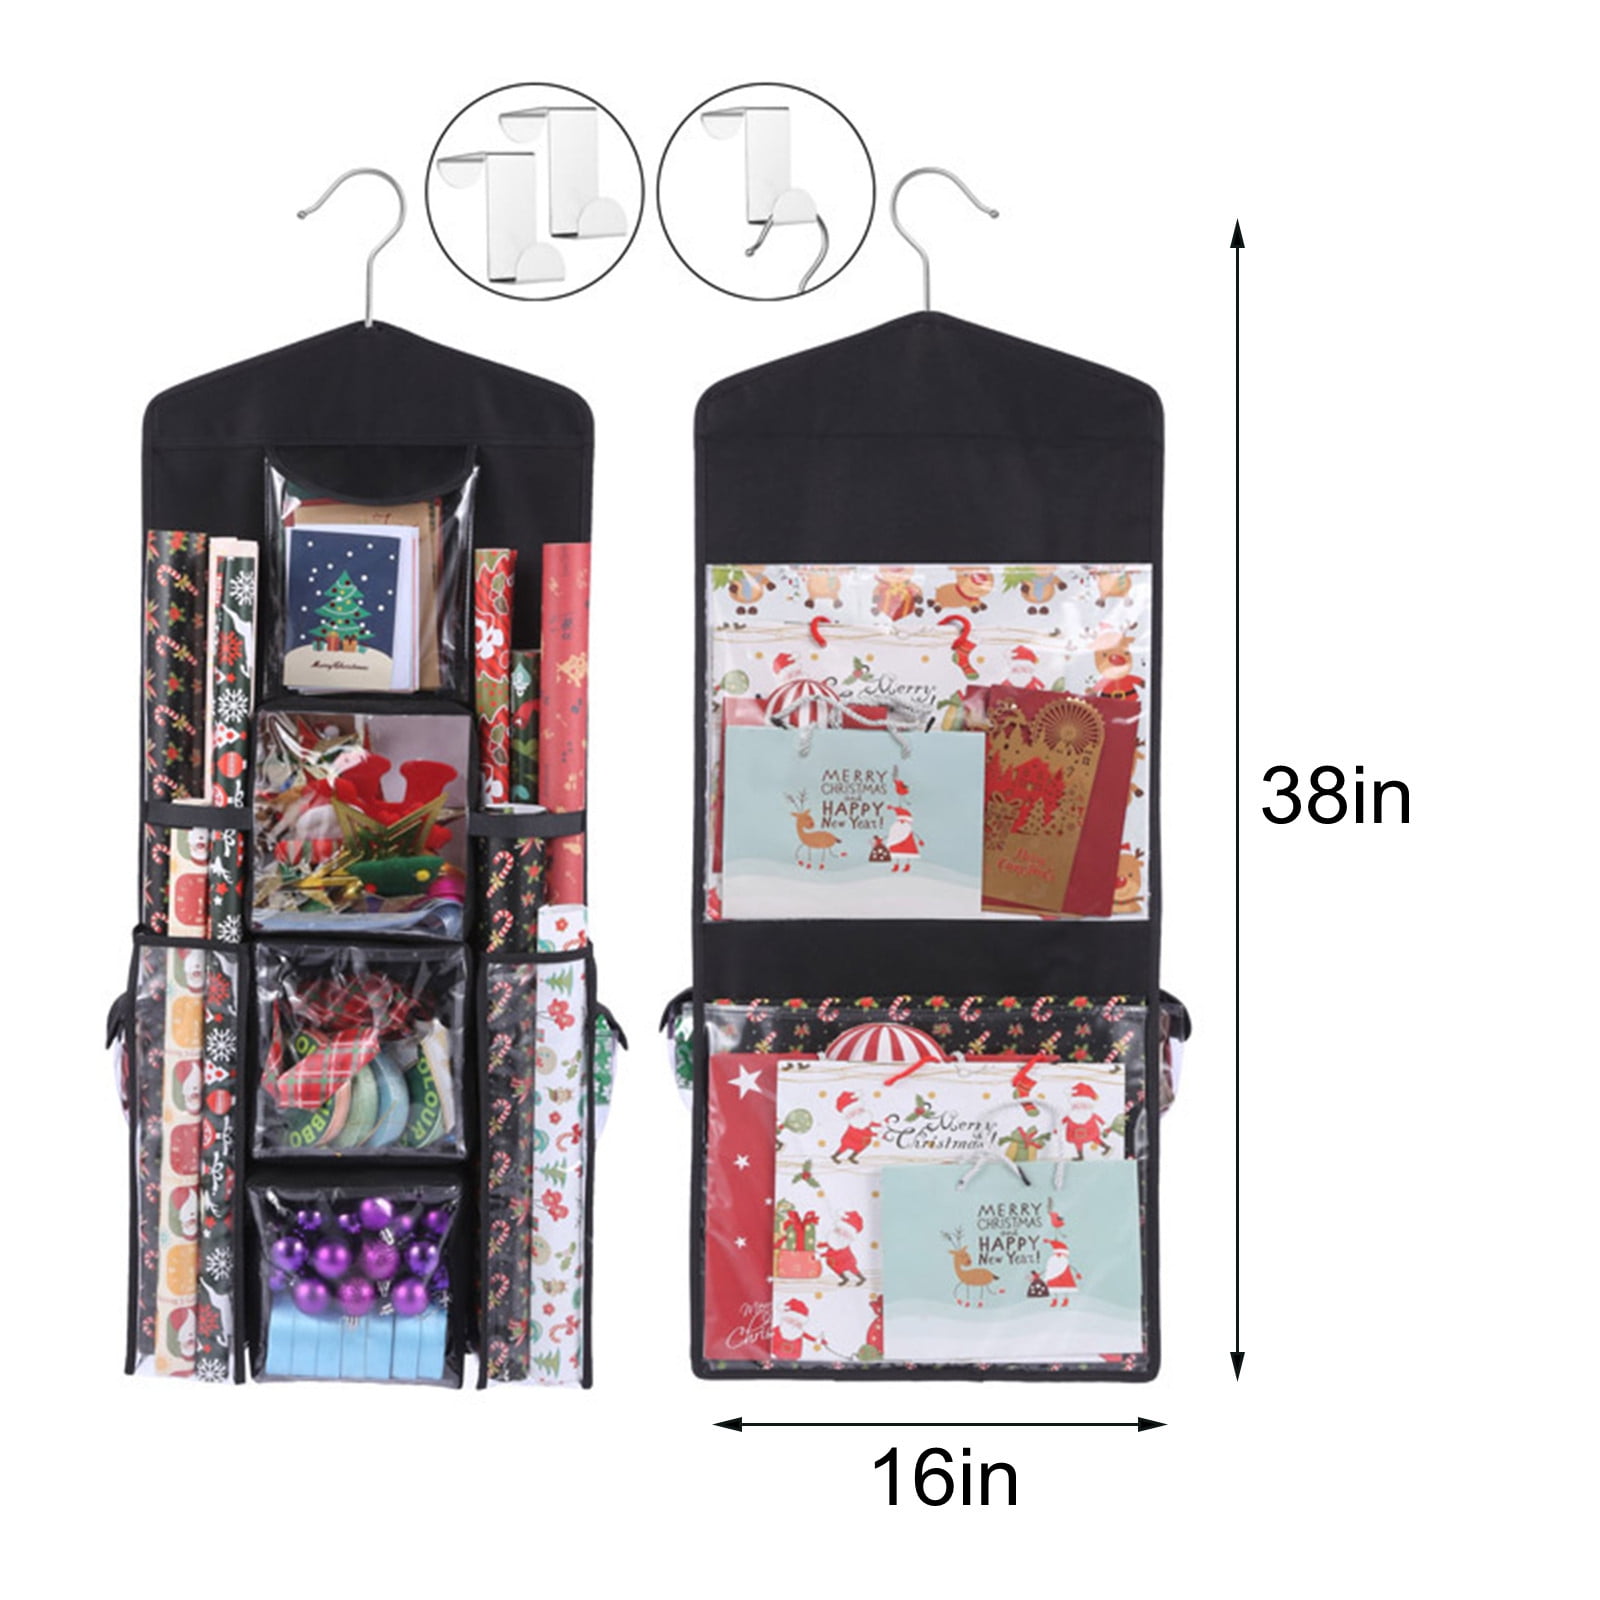  Freeote Hanging Gift Wrap Storage Organizer, 40x16 Inch Wrapping  Paper Storage Hanging Gift Bag Organizer Station with Multiple Pockets,  White : Home & Kitchen